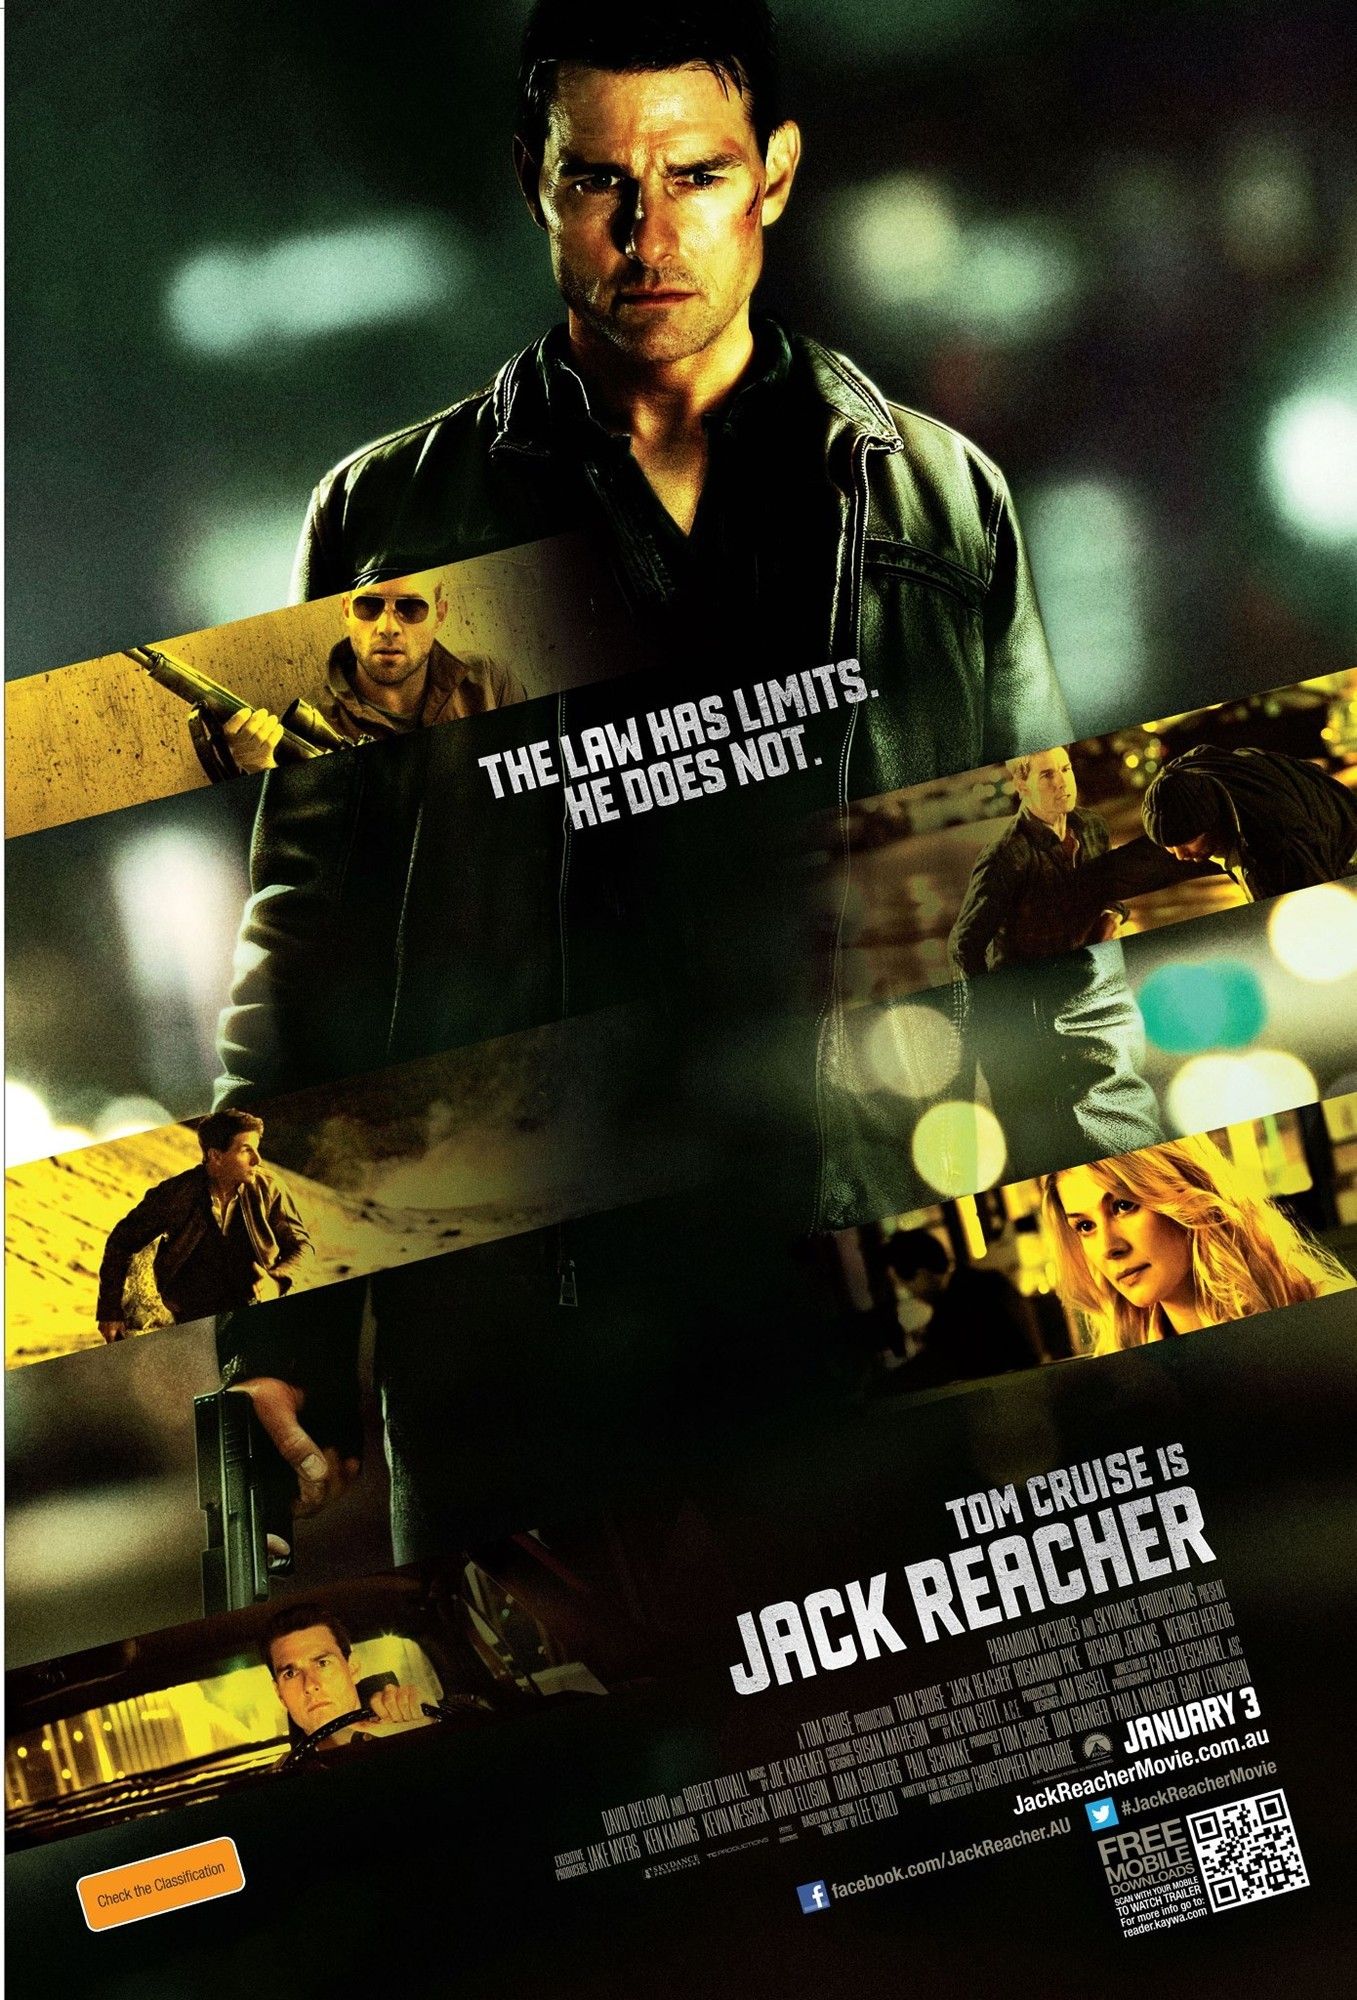 Poster of Paramount Pictures' Jack Reacher (2012)